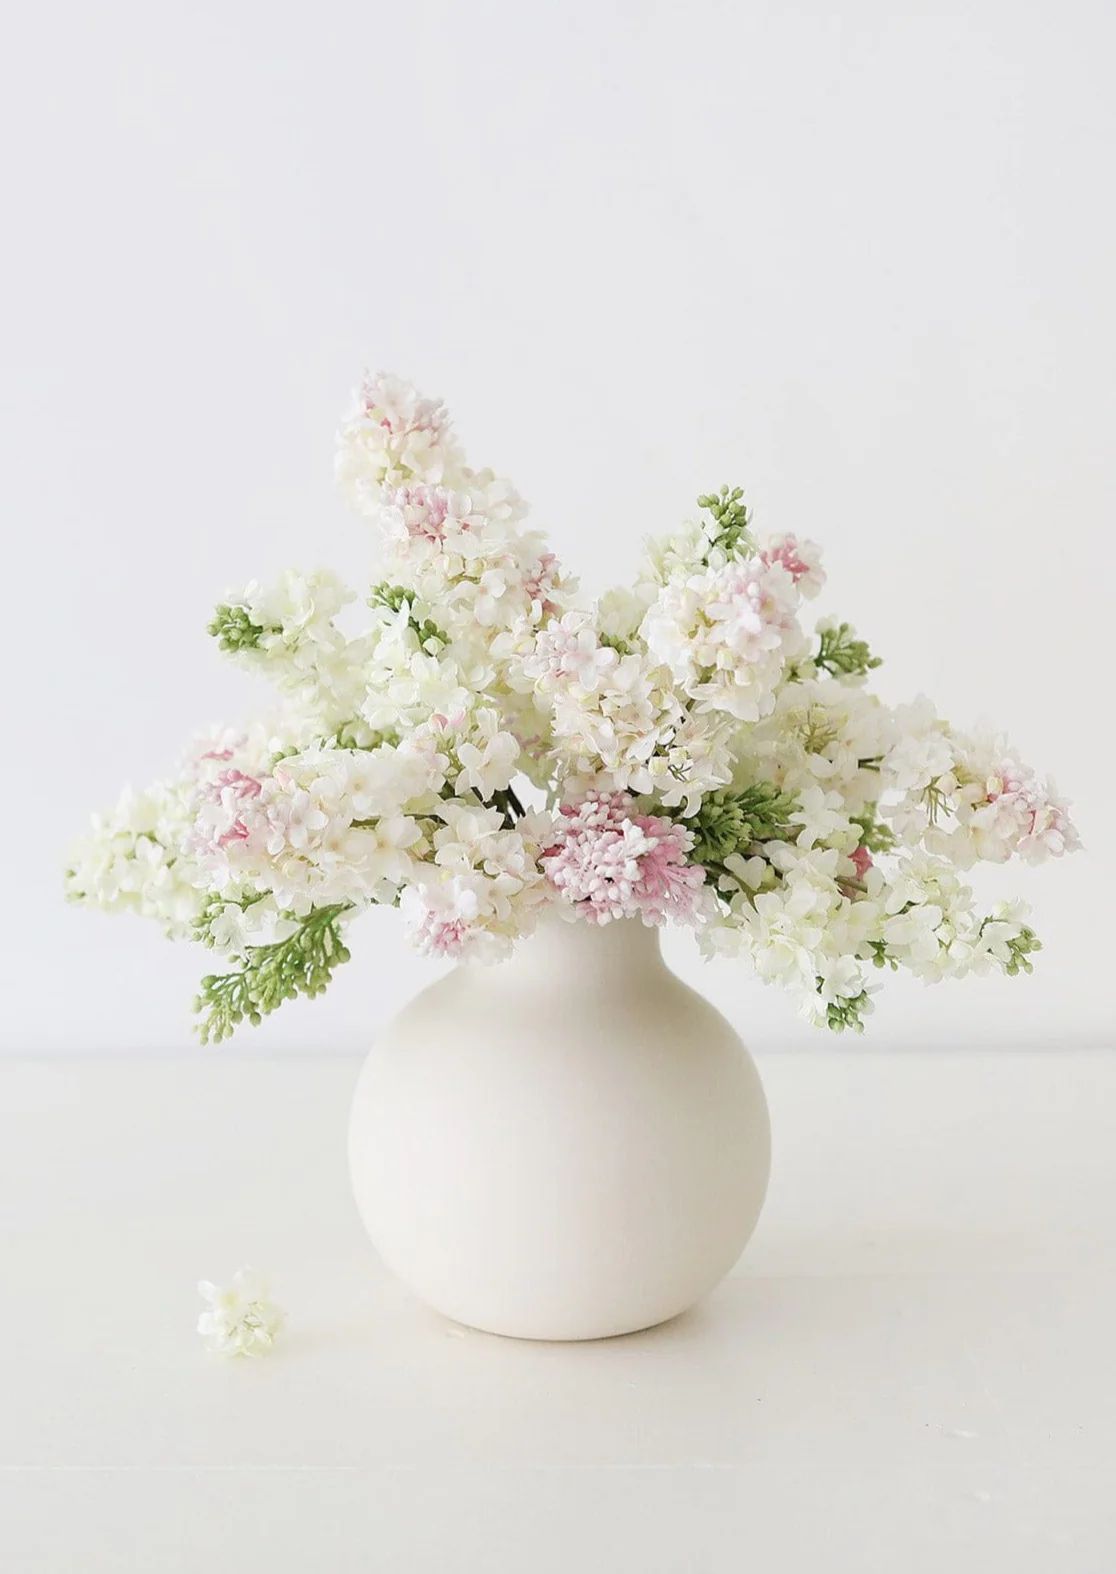 Creamy White Round Ceramic Vase - 8" Tall x 8" Wide | Afloral (US)